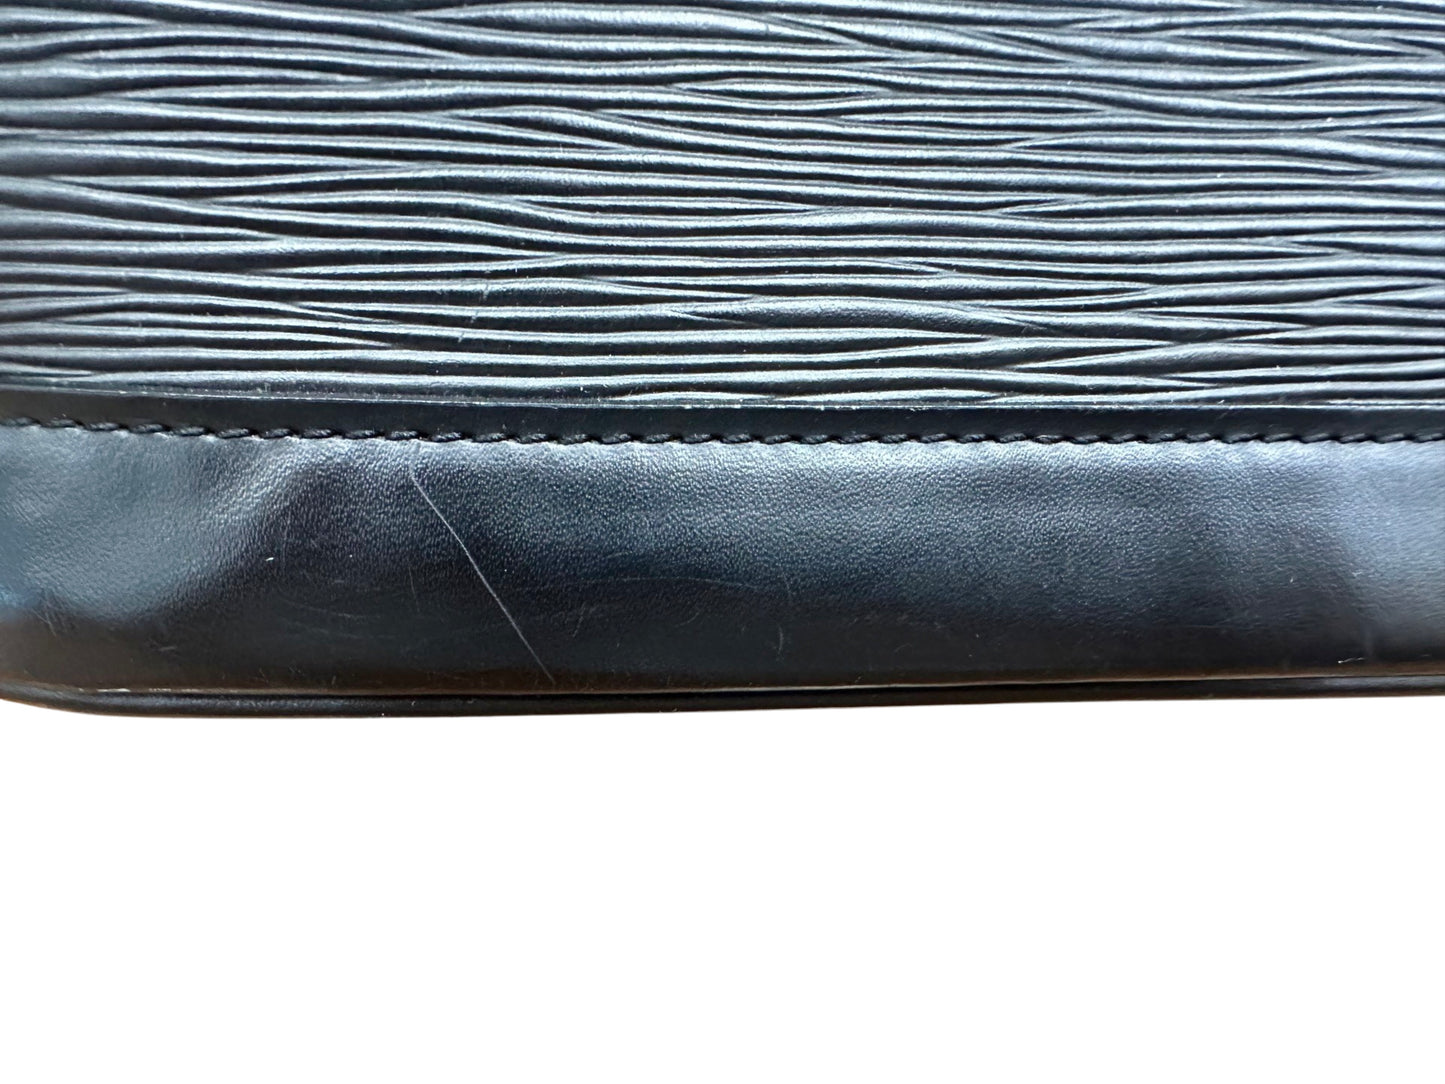 Bottom of bag with scuff marks